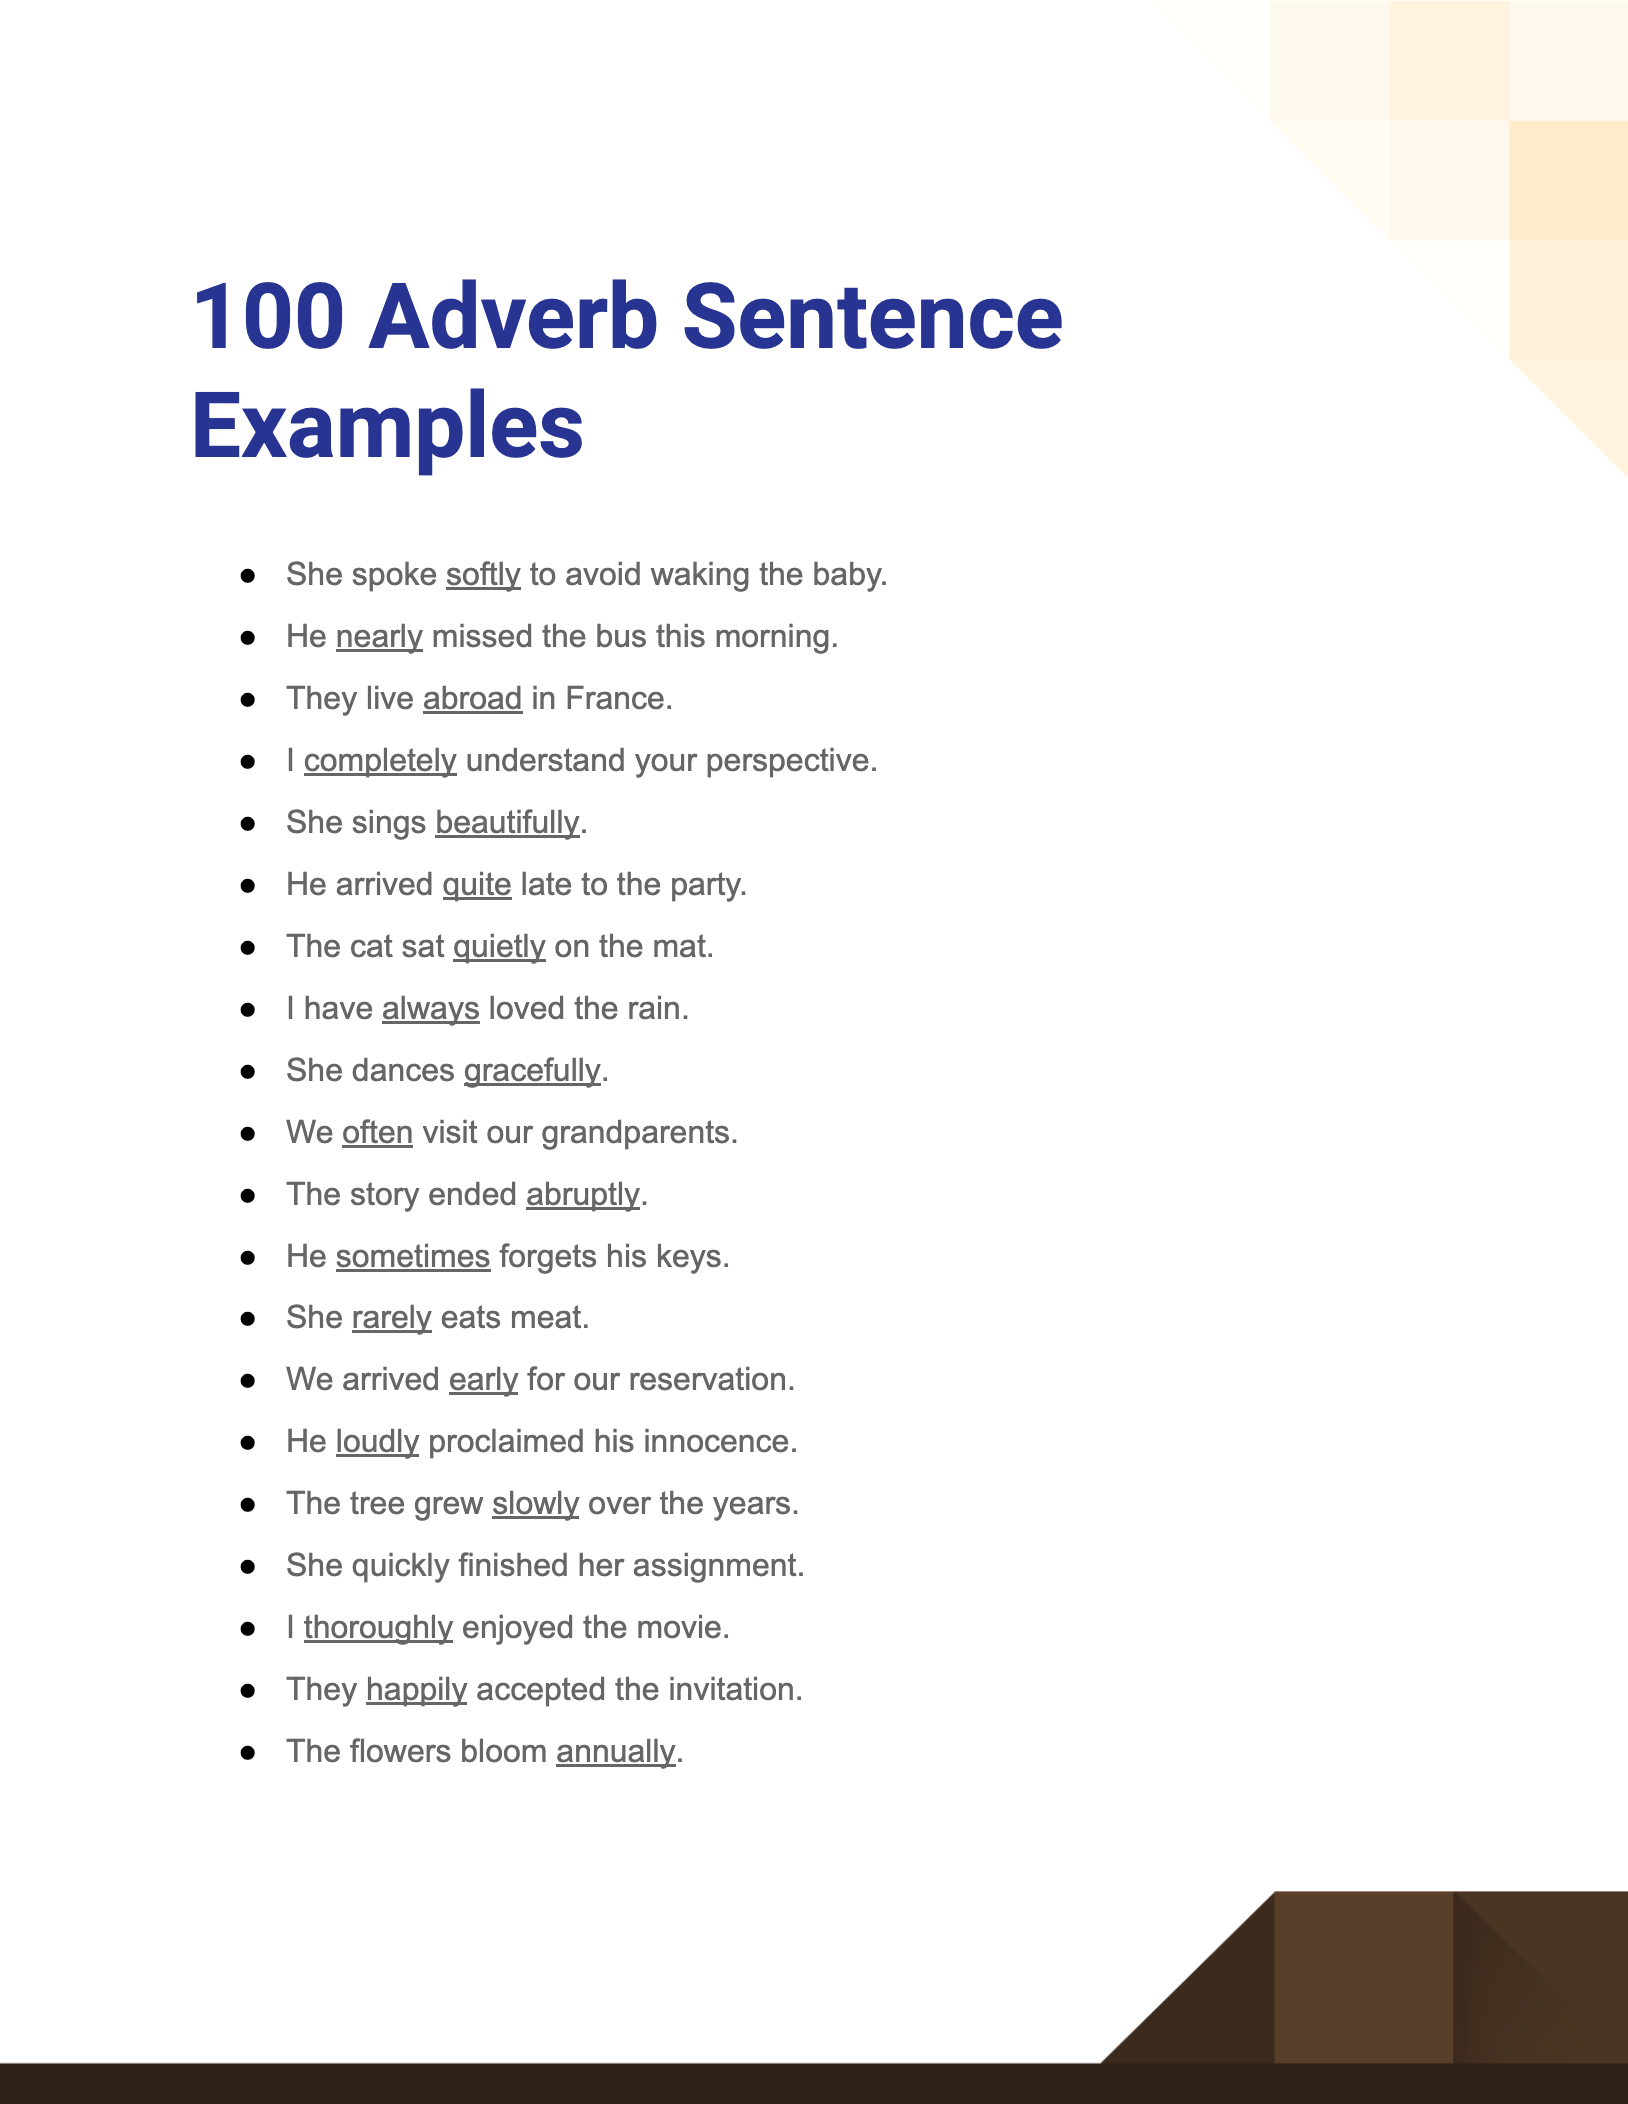 adverb sentence examples